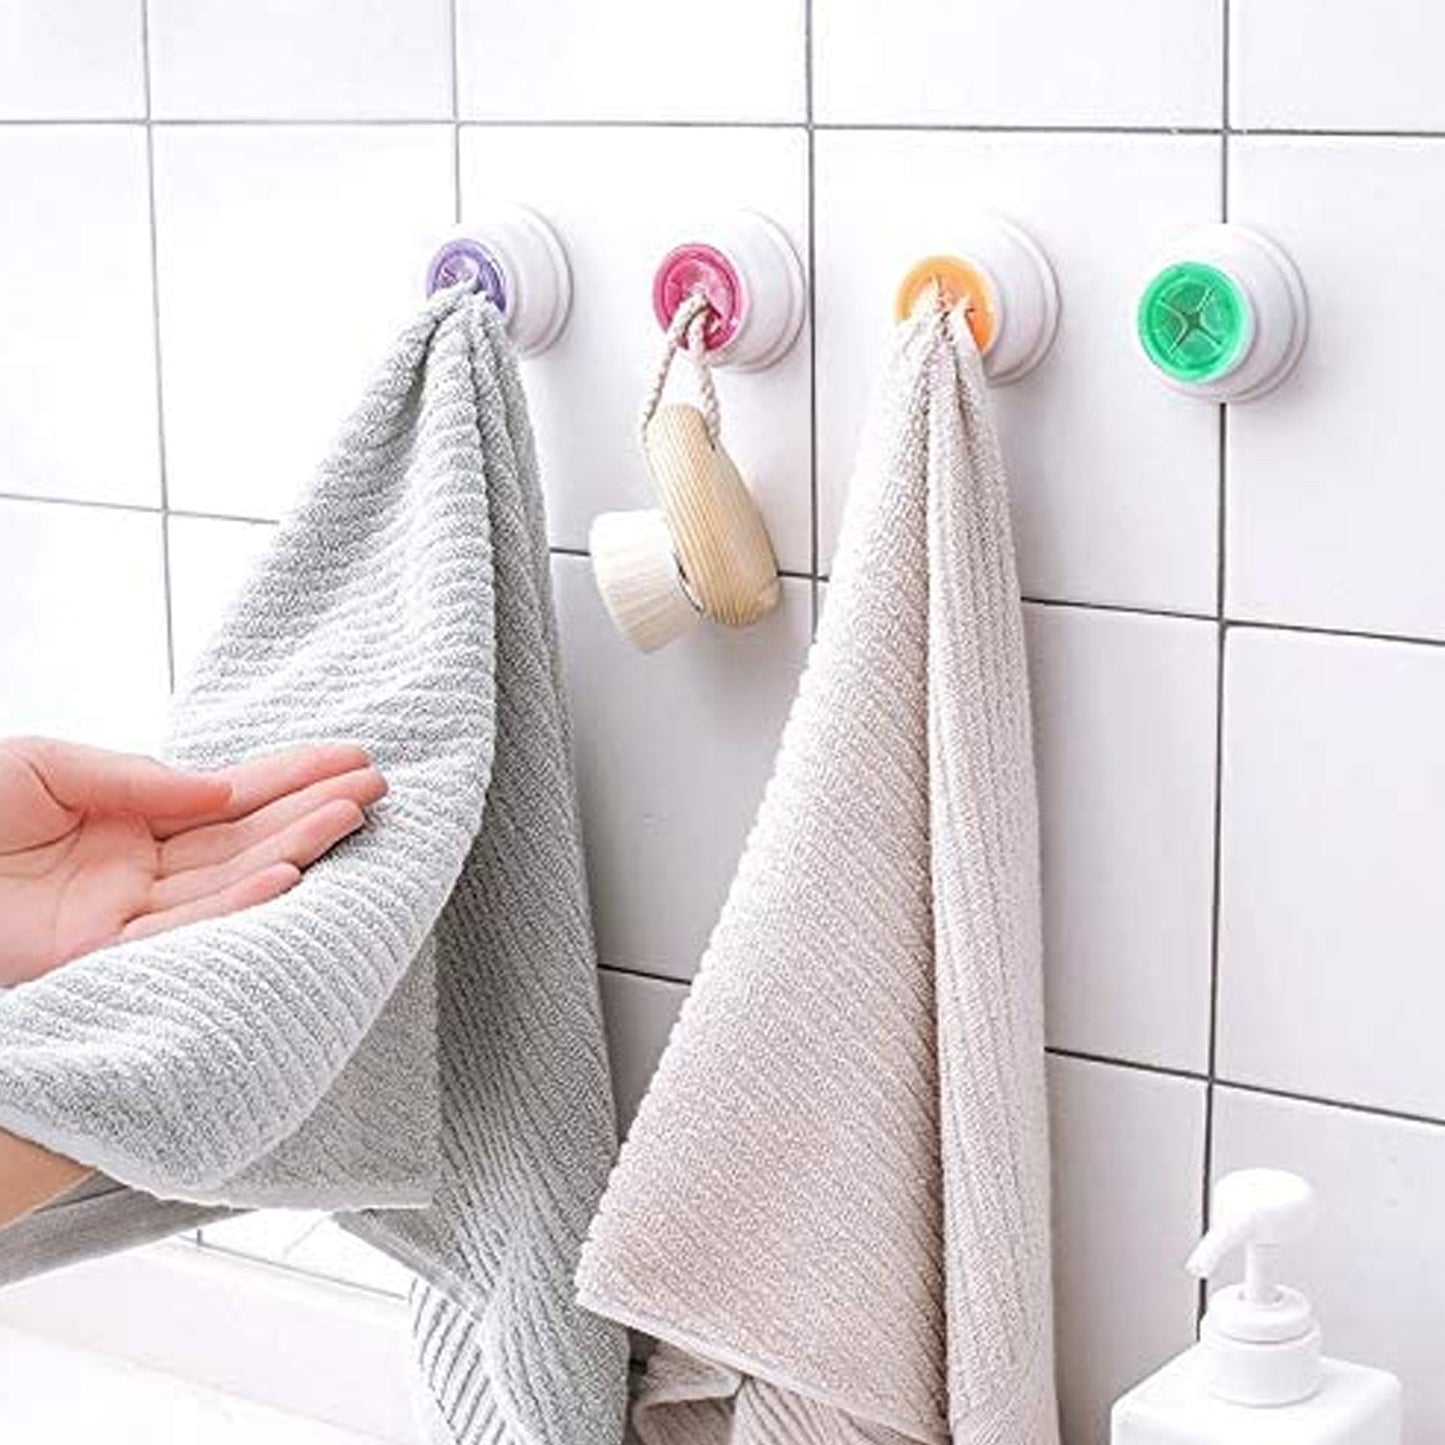 Towel Holder for hanging towels and easy take-in 4 Pcs Pack